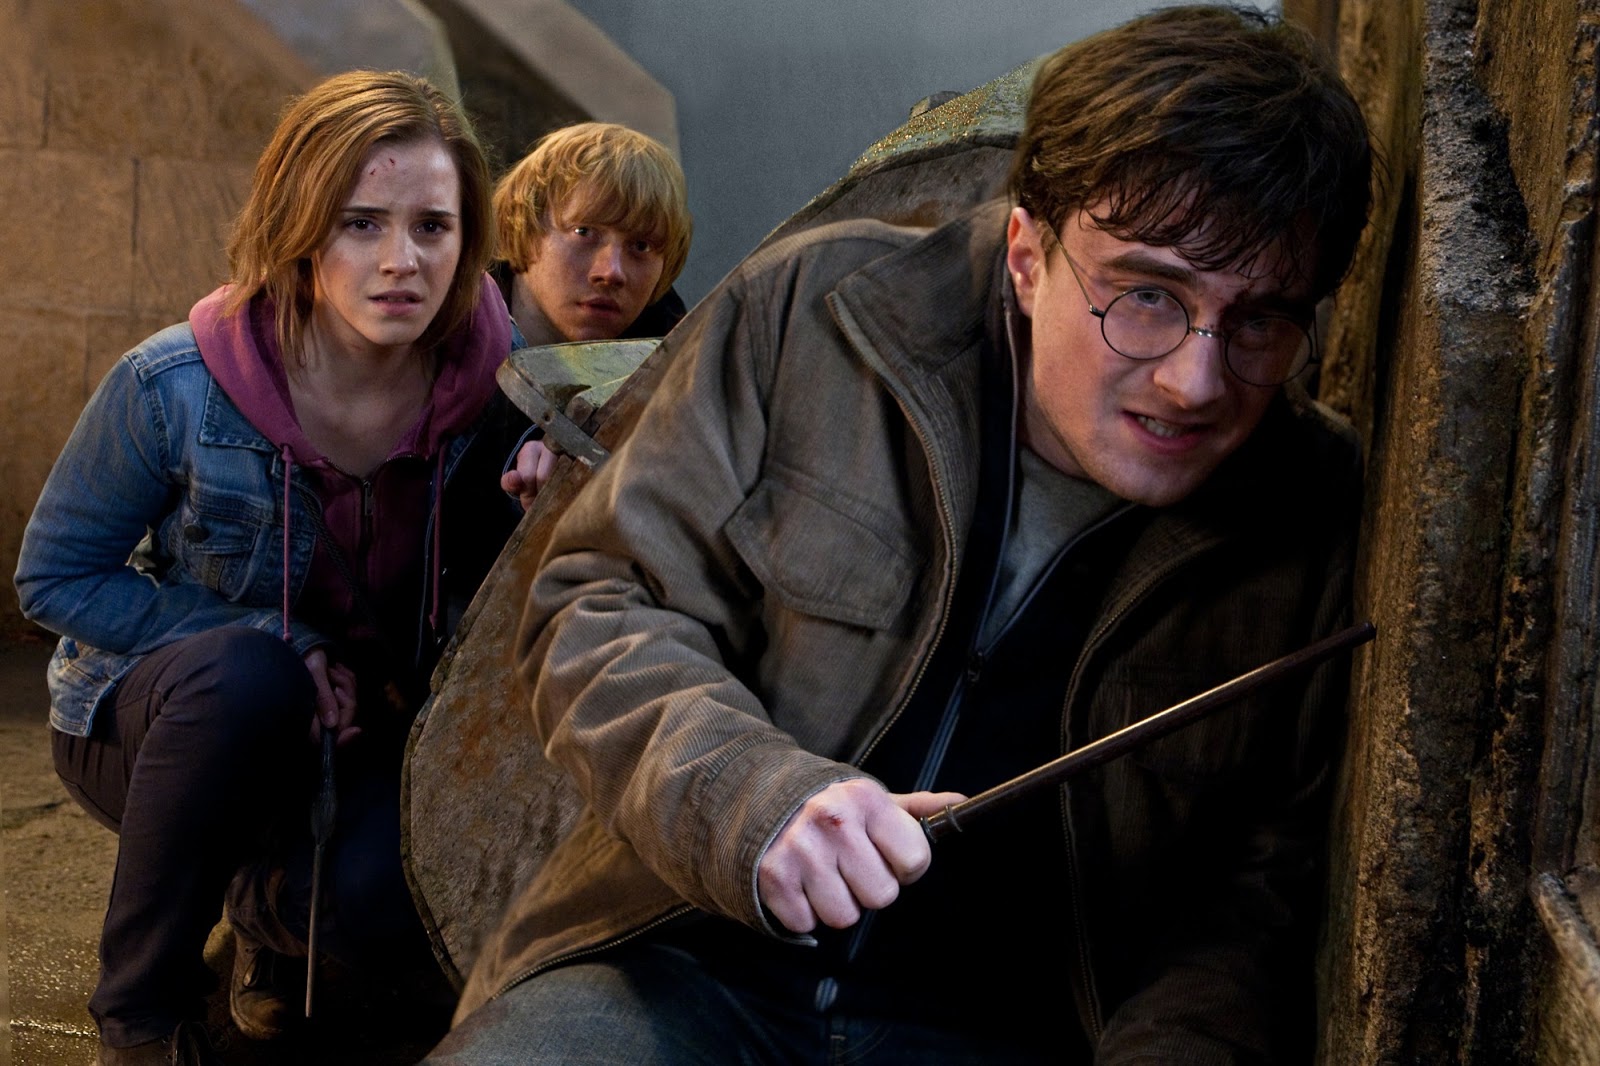 Hermione Granger (Emma Watson), Ron Weasley (Rupert Grint) and Harry Potter (Daniel Radcliffe) ready for the final showdown in Harry Potter and the Deathly Hallows Part 2 (2011)